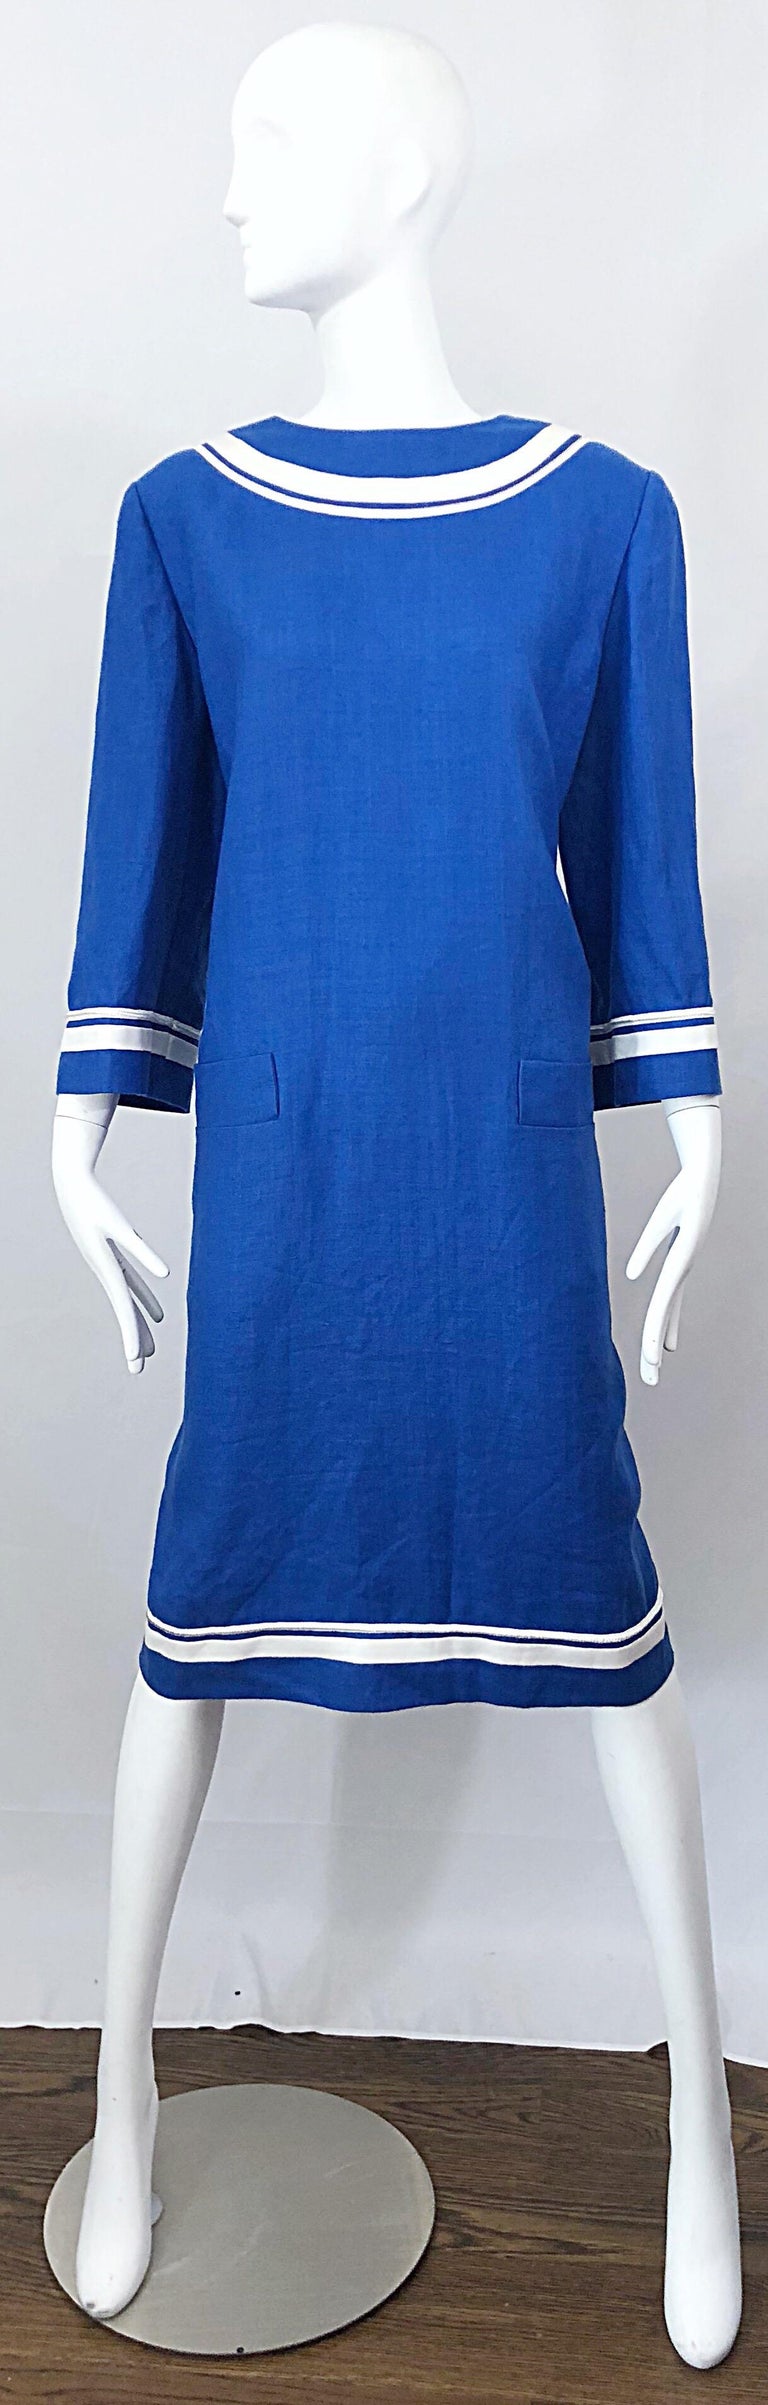 Chic vintage BILL BLASS Size 16 blue and white nautical long sleeved linen dress! Features the finest of Irish linens that is super soft and flattering. Beautiful shade of blue looks great on any skin tone. Fully lined. Hidden zipper up the back